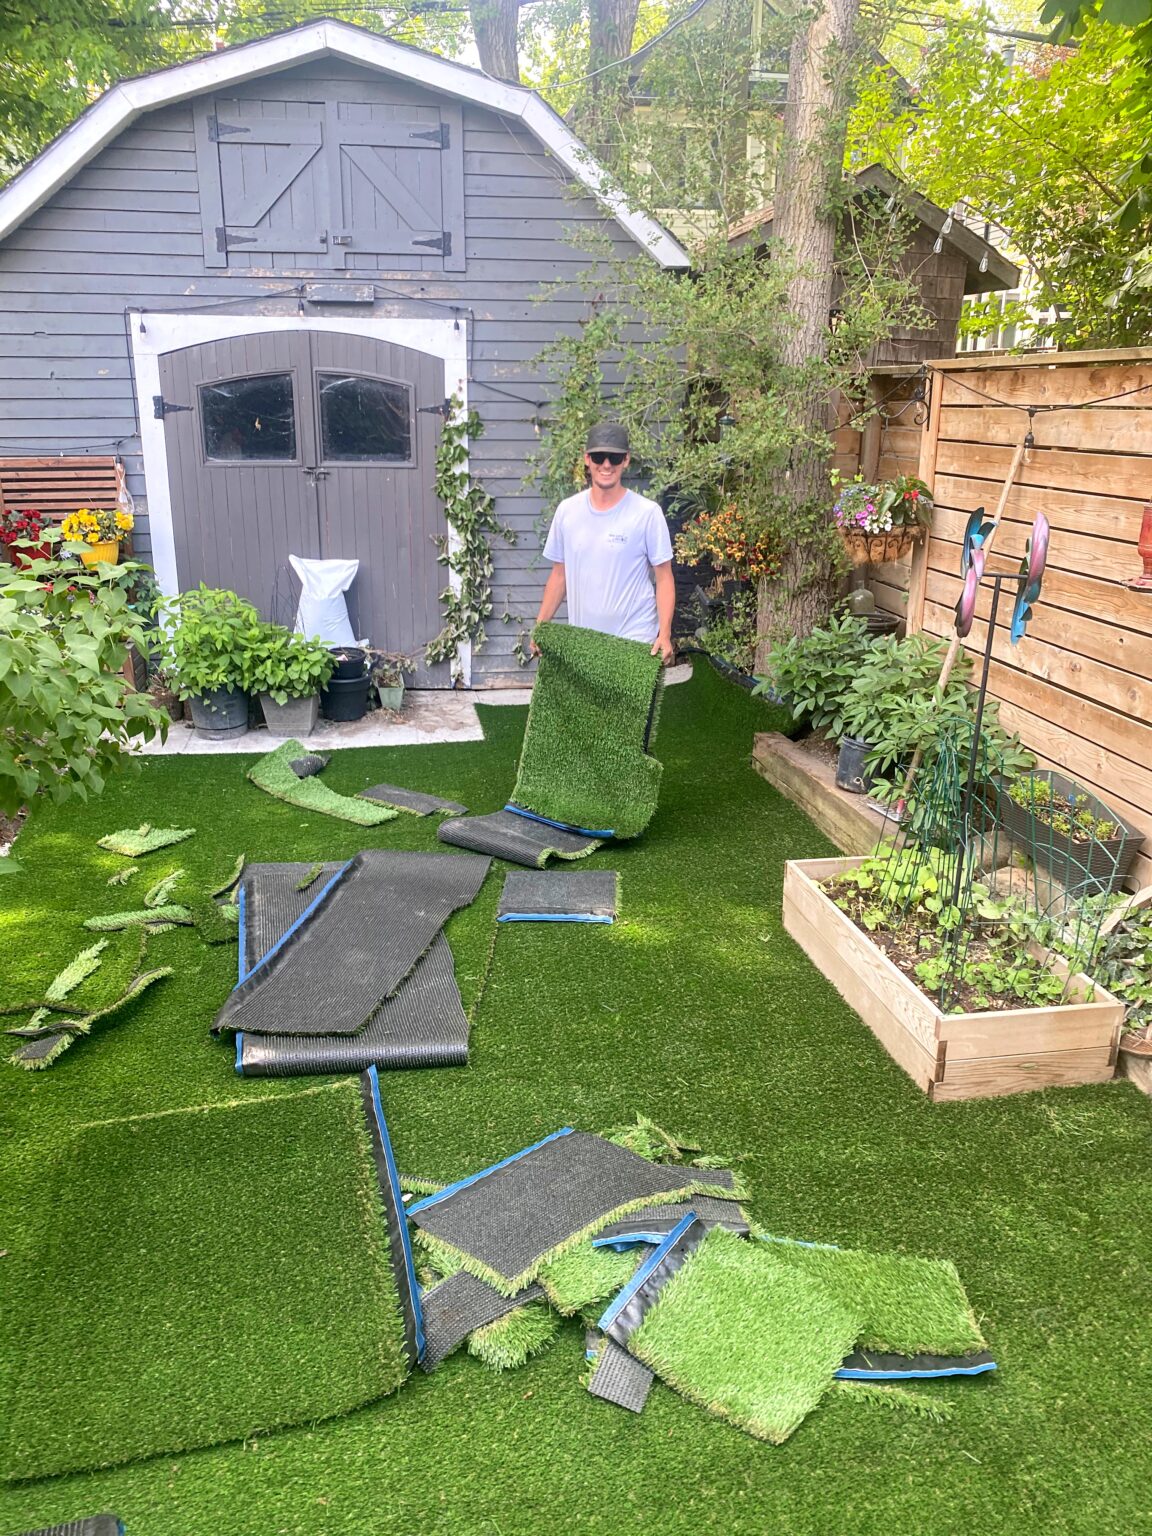 Why I Chose Artificial Grass With Dogs – And Love It! - Help! I've Got Pets